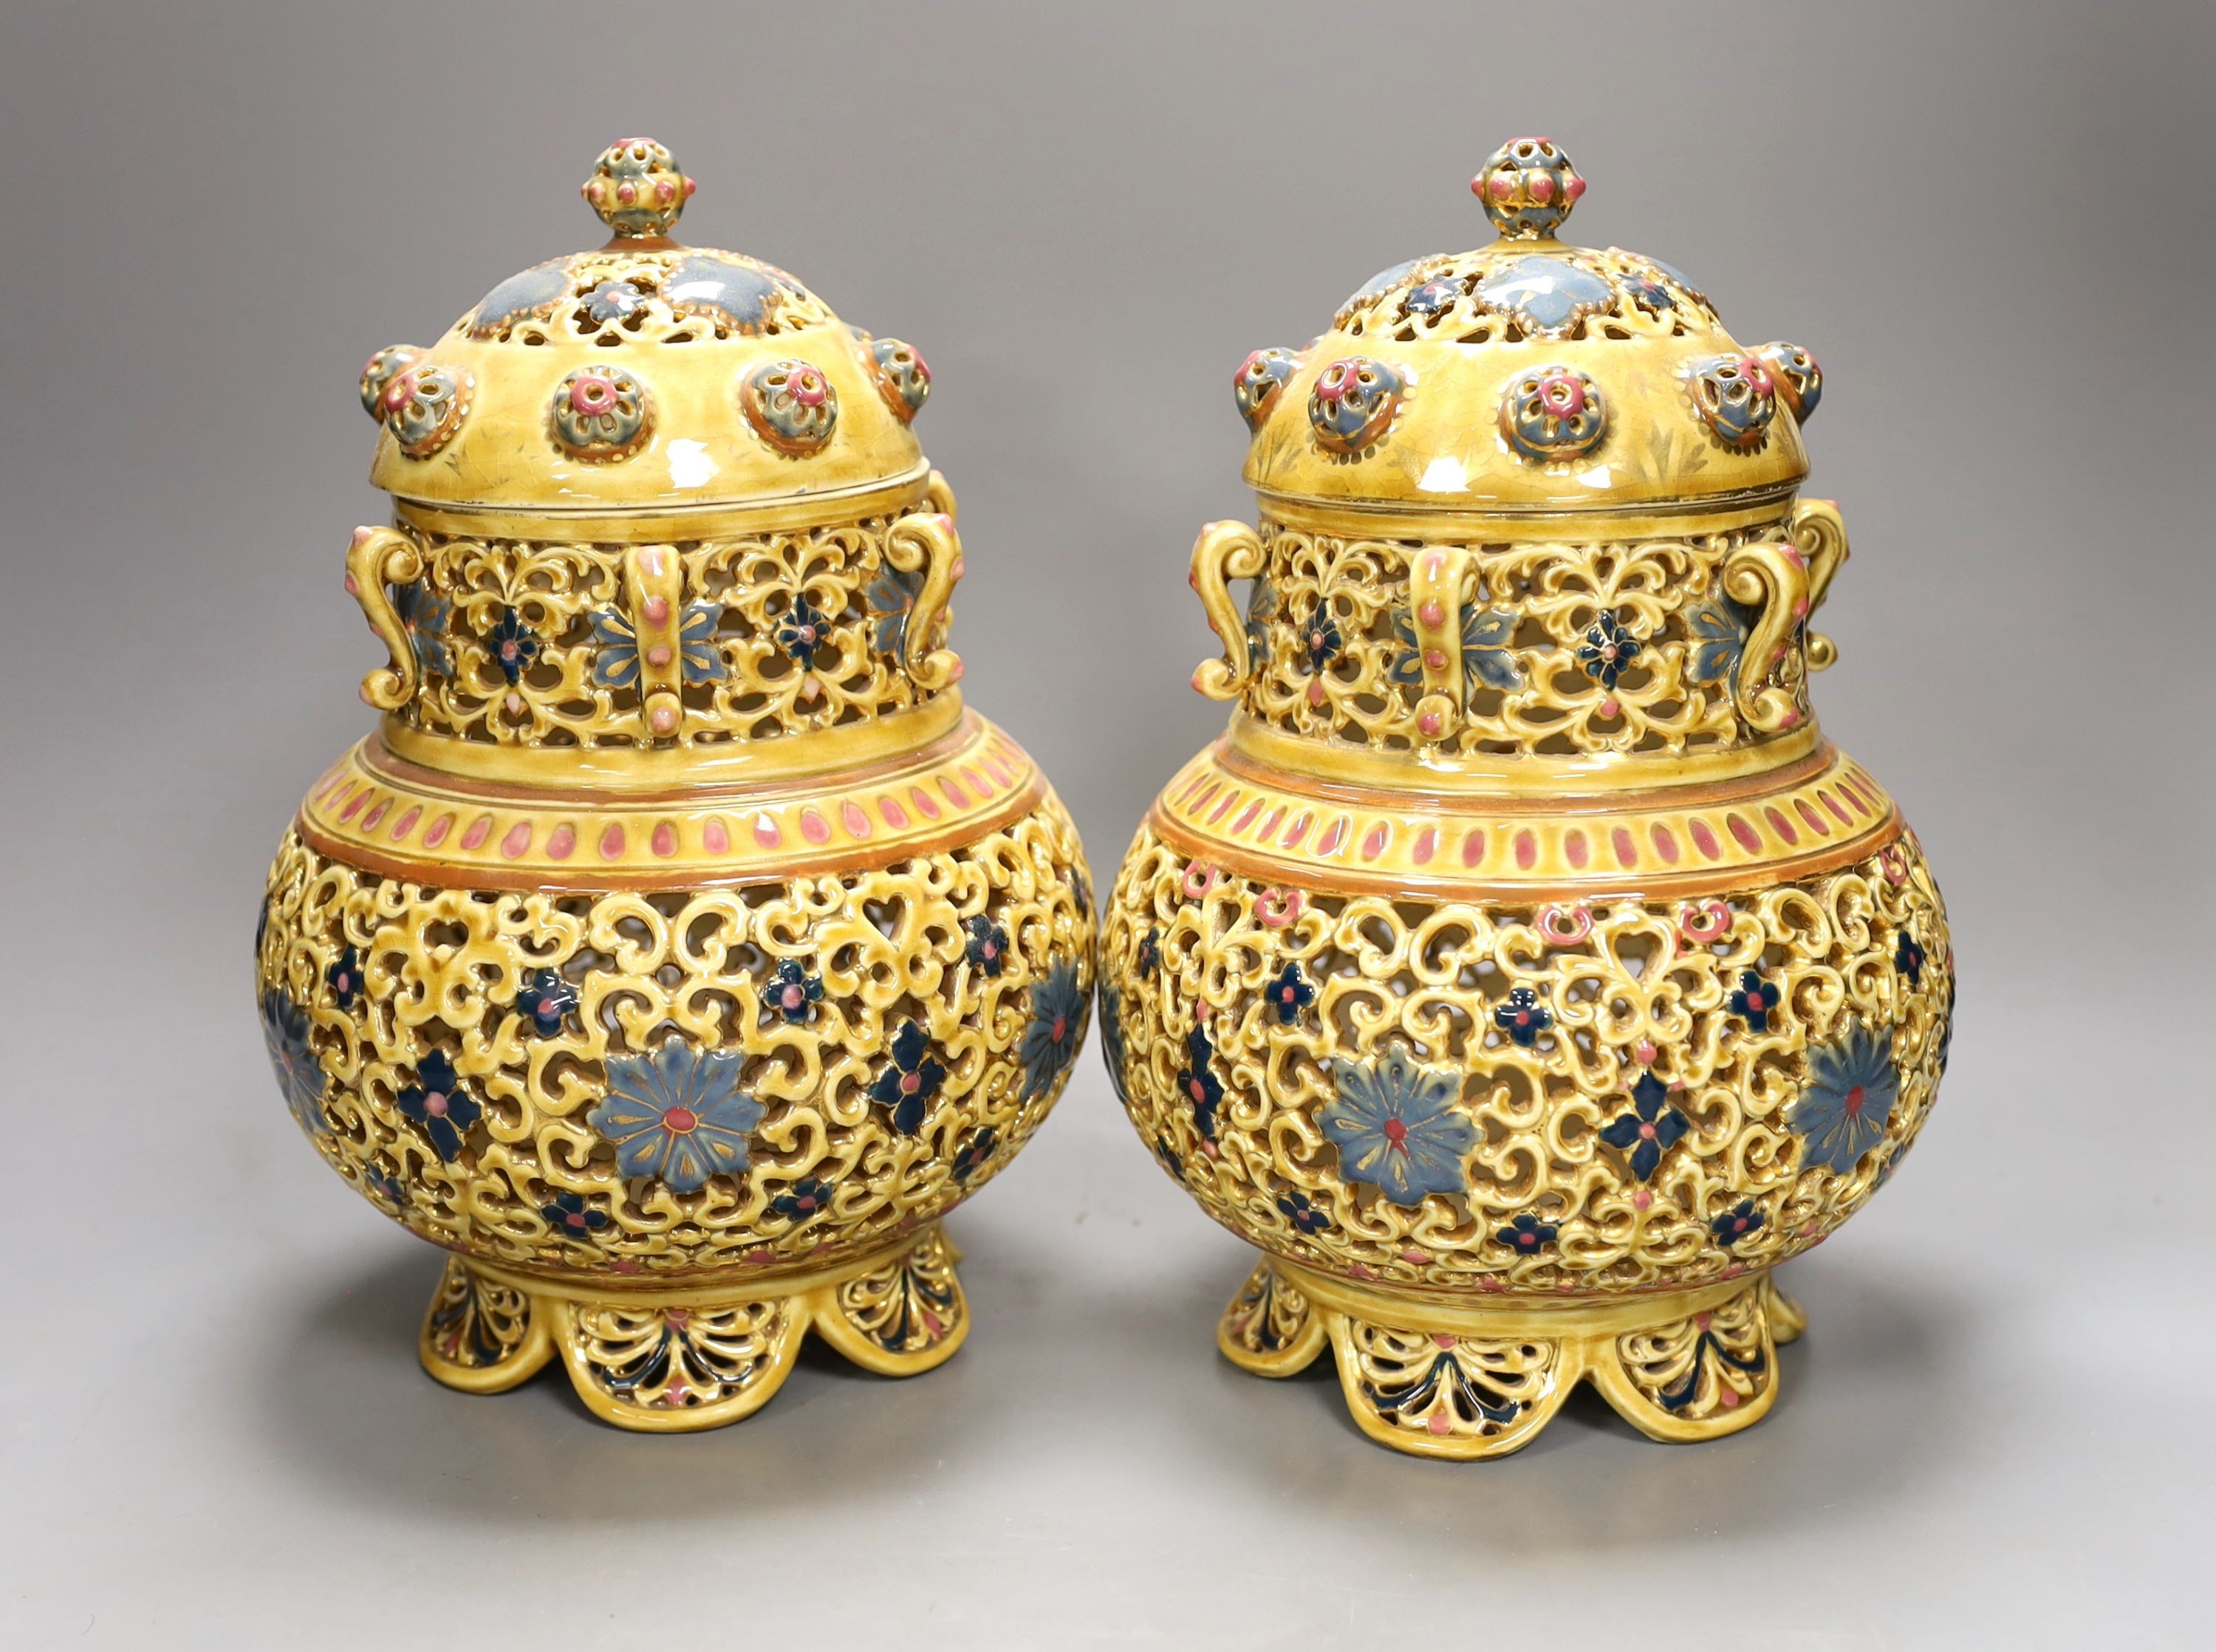 A pair of Zsolnay Pecs Persian inspired vases and covers, 27 cms high.